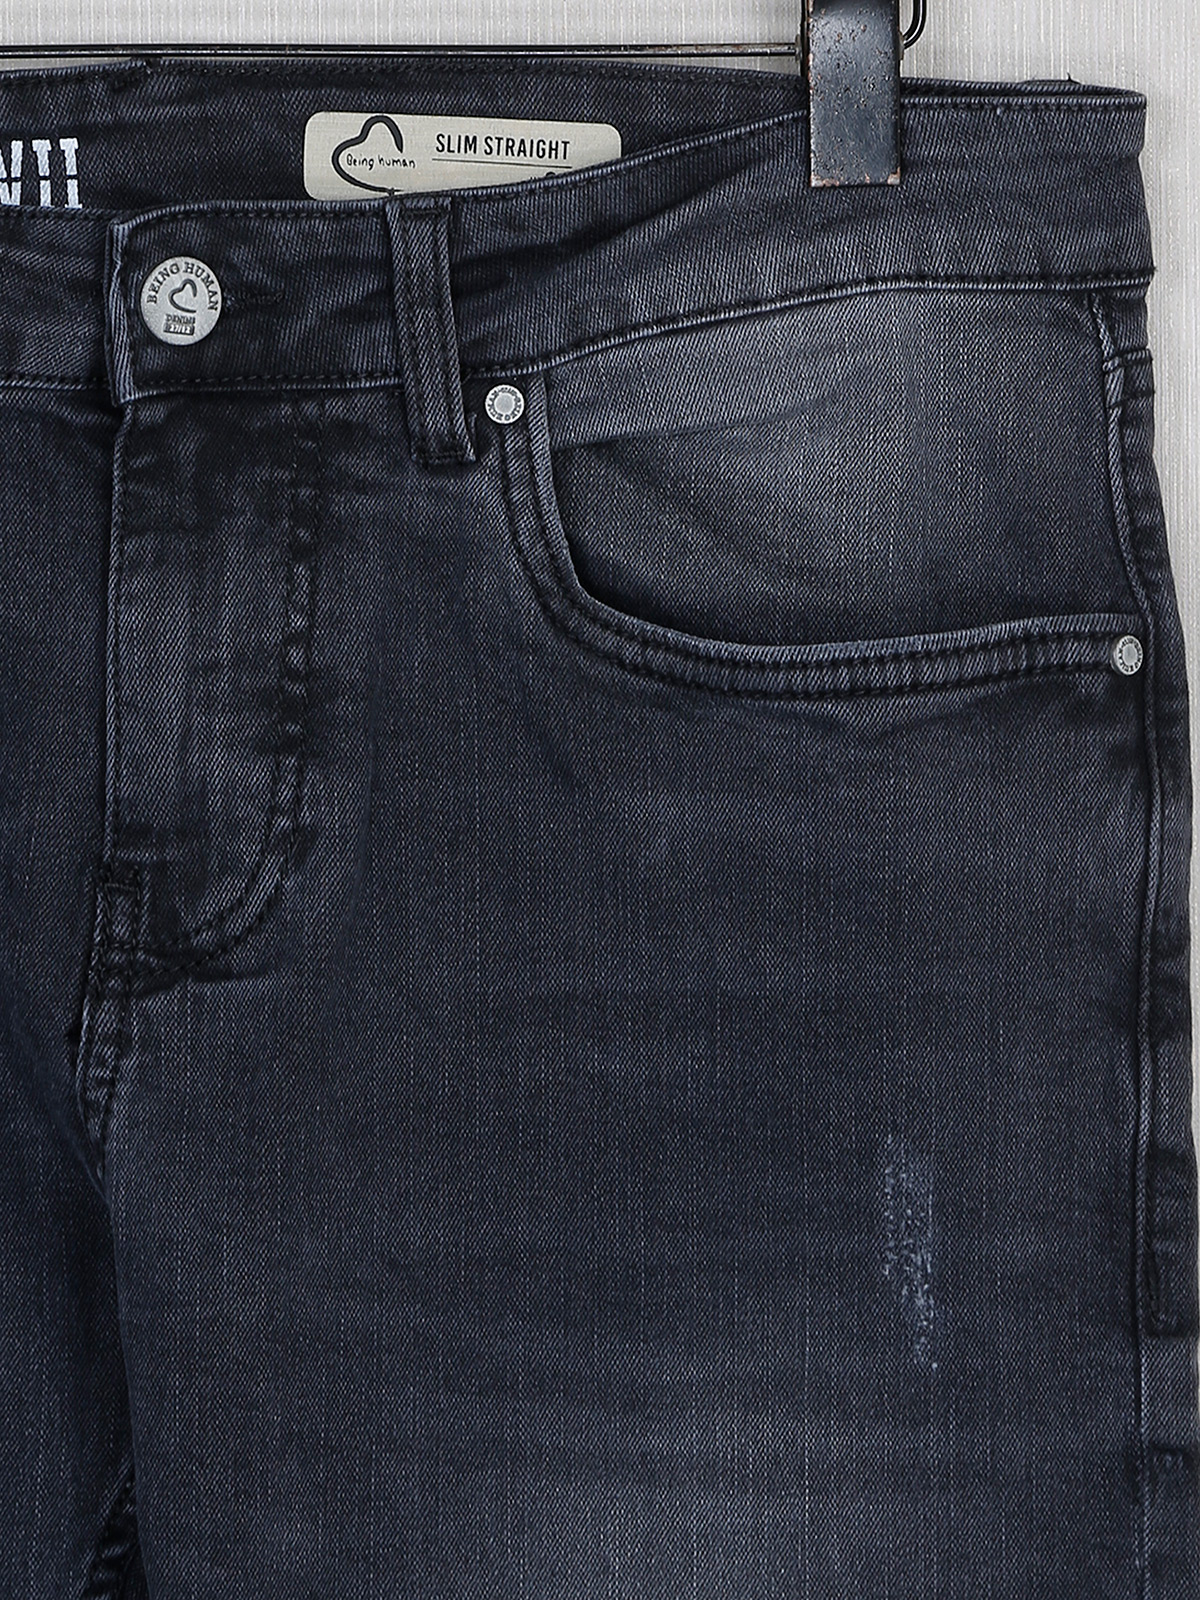 Jeans & Trousers | Blue Being Human Denim Jeans | Freeup